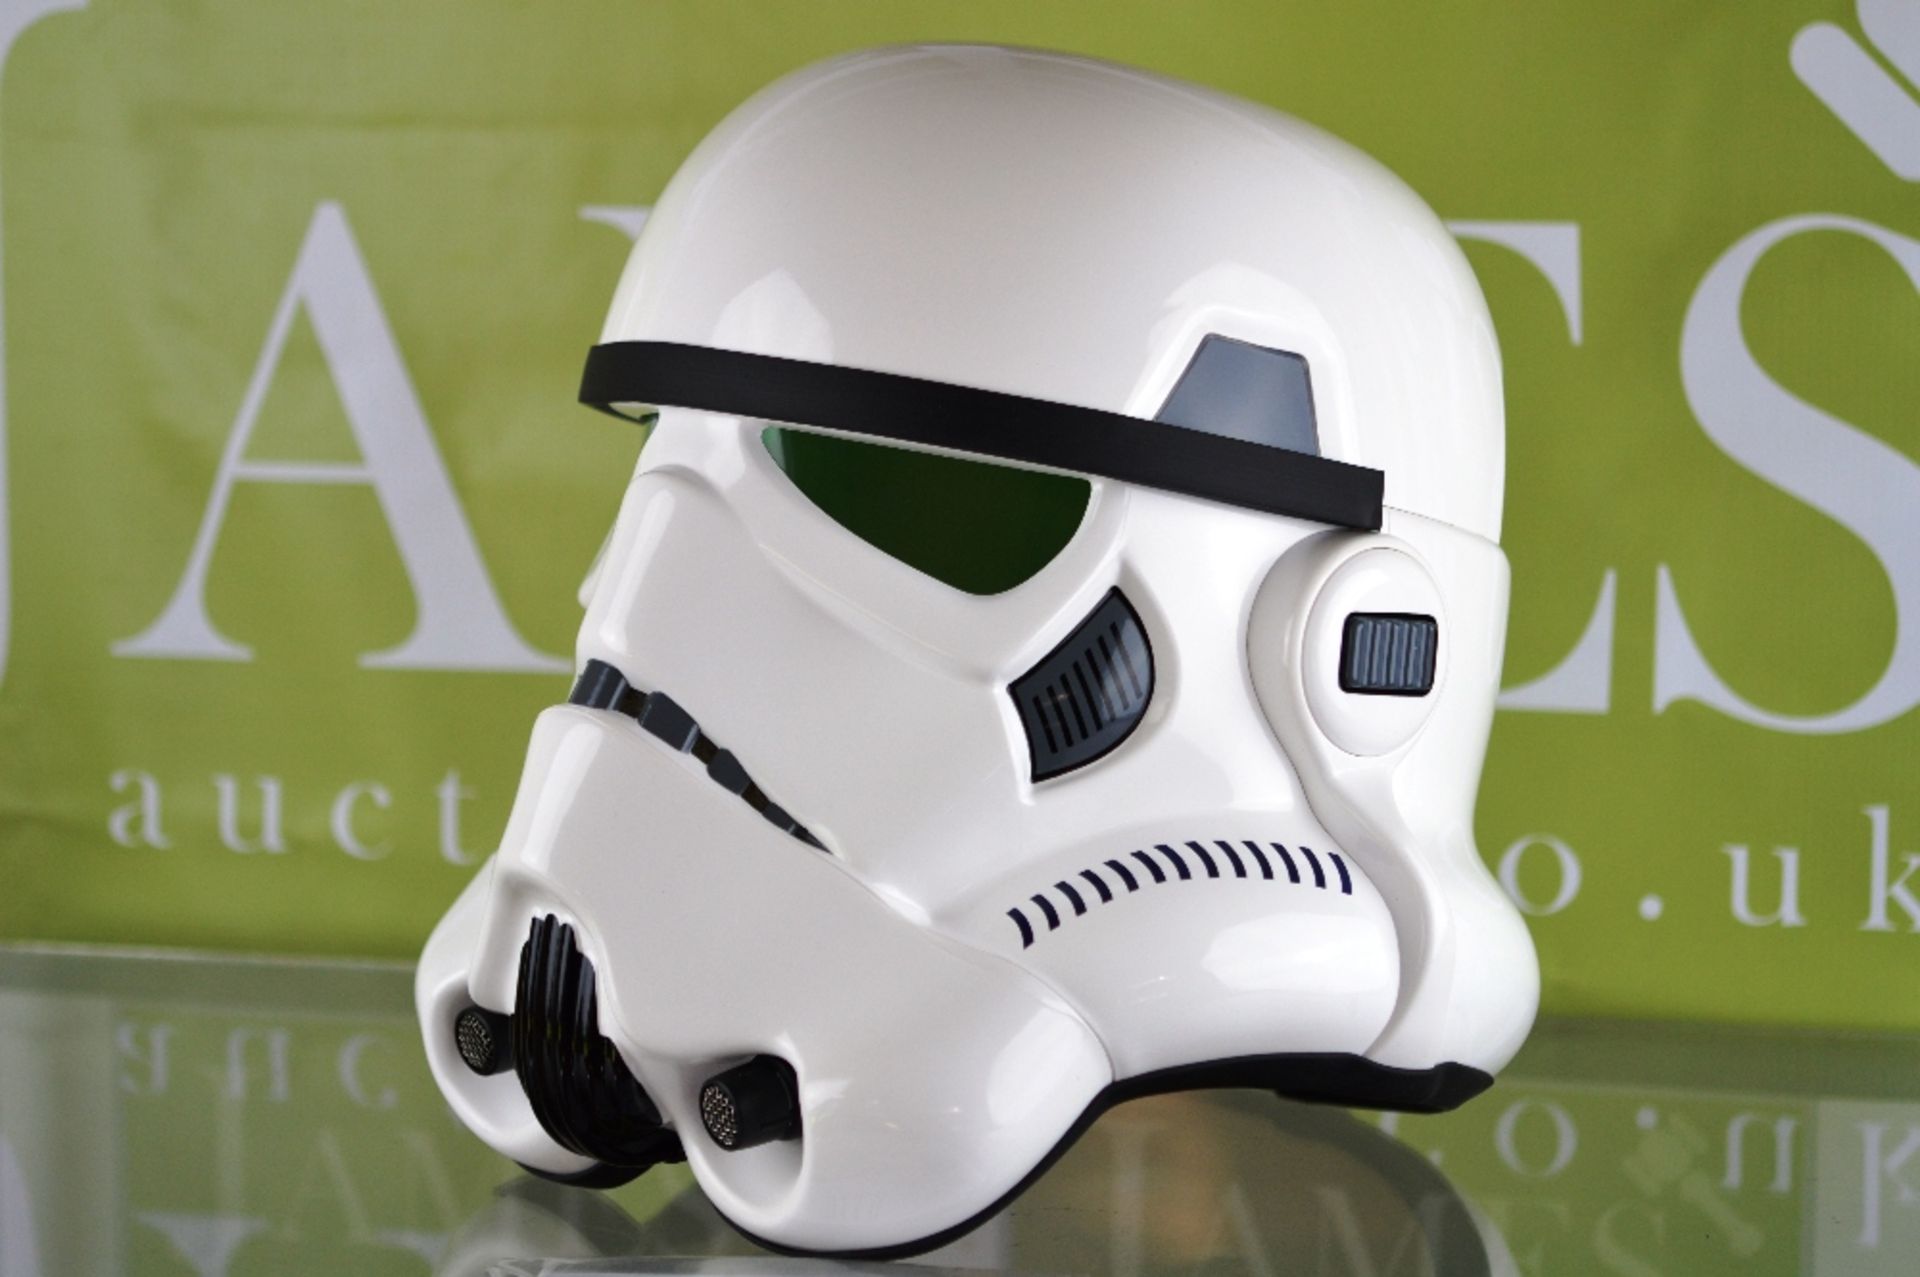 Master replica lifesize 1:1 stormtrooper mask comes with all original packaging, mint example - Image 2 of 4